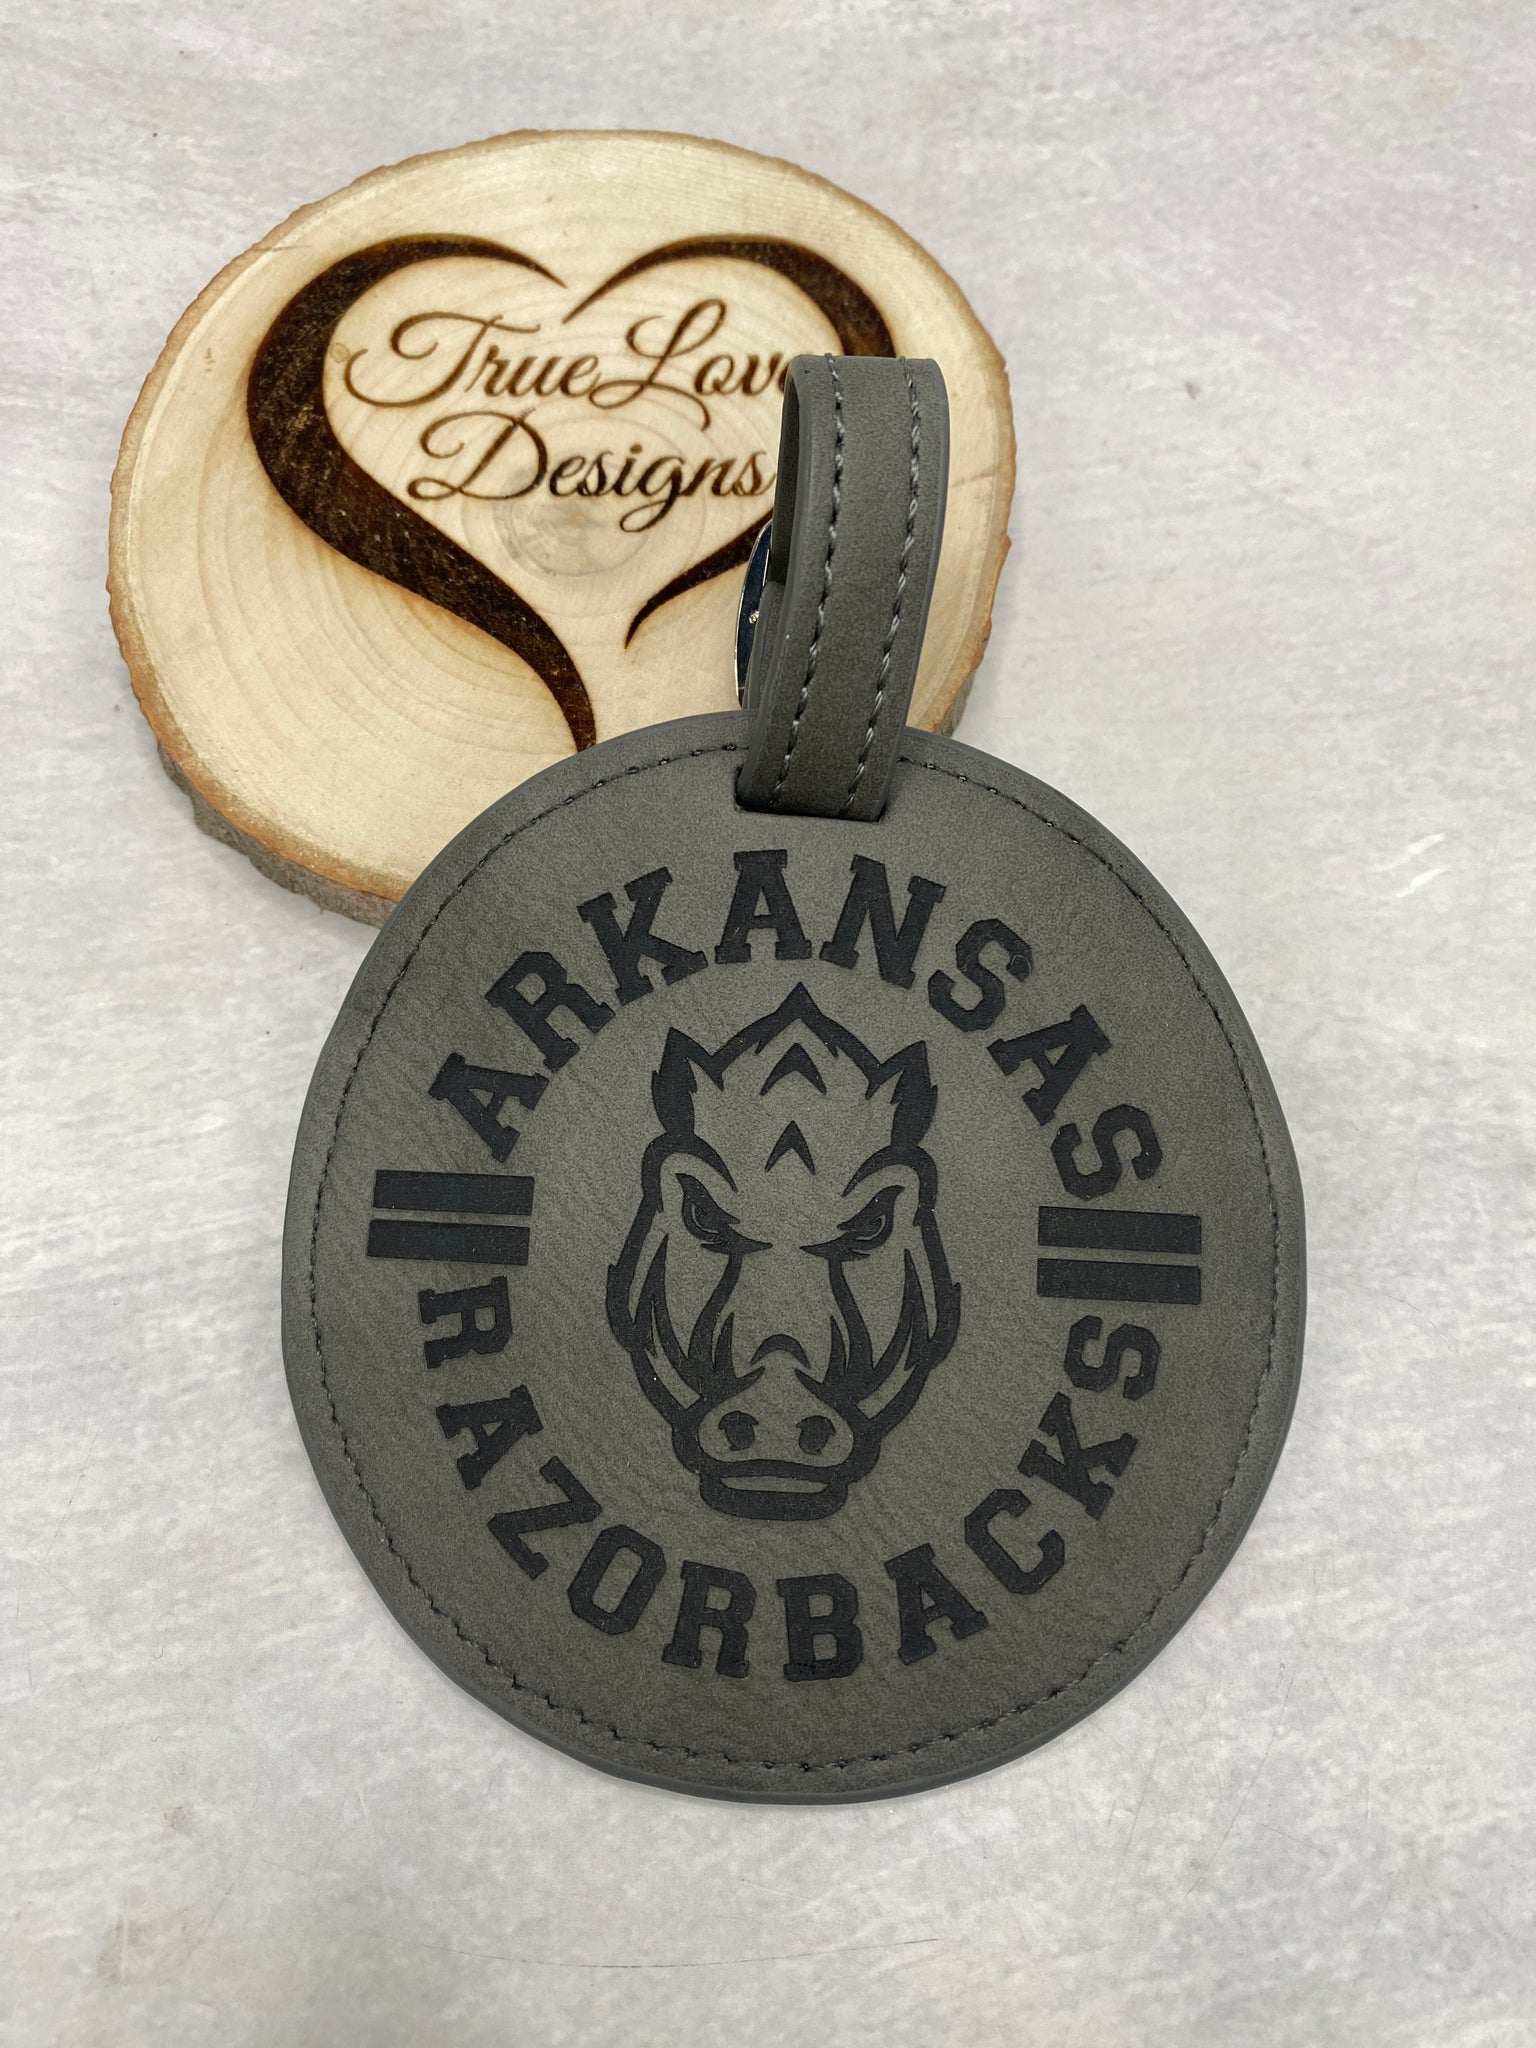 Custom leather golf bag tags personalized golf gifts for men – DMleather